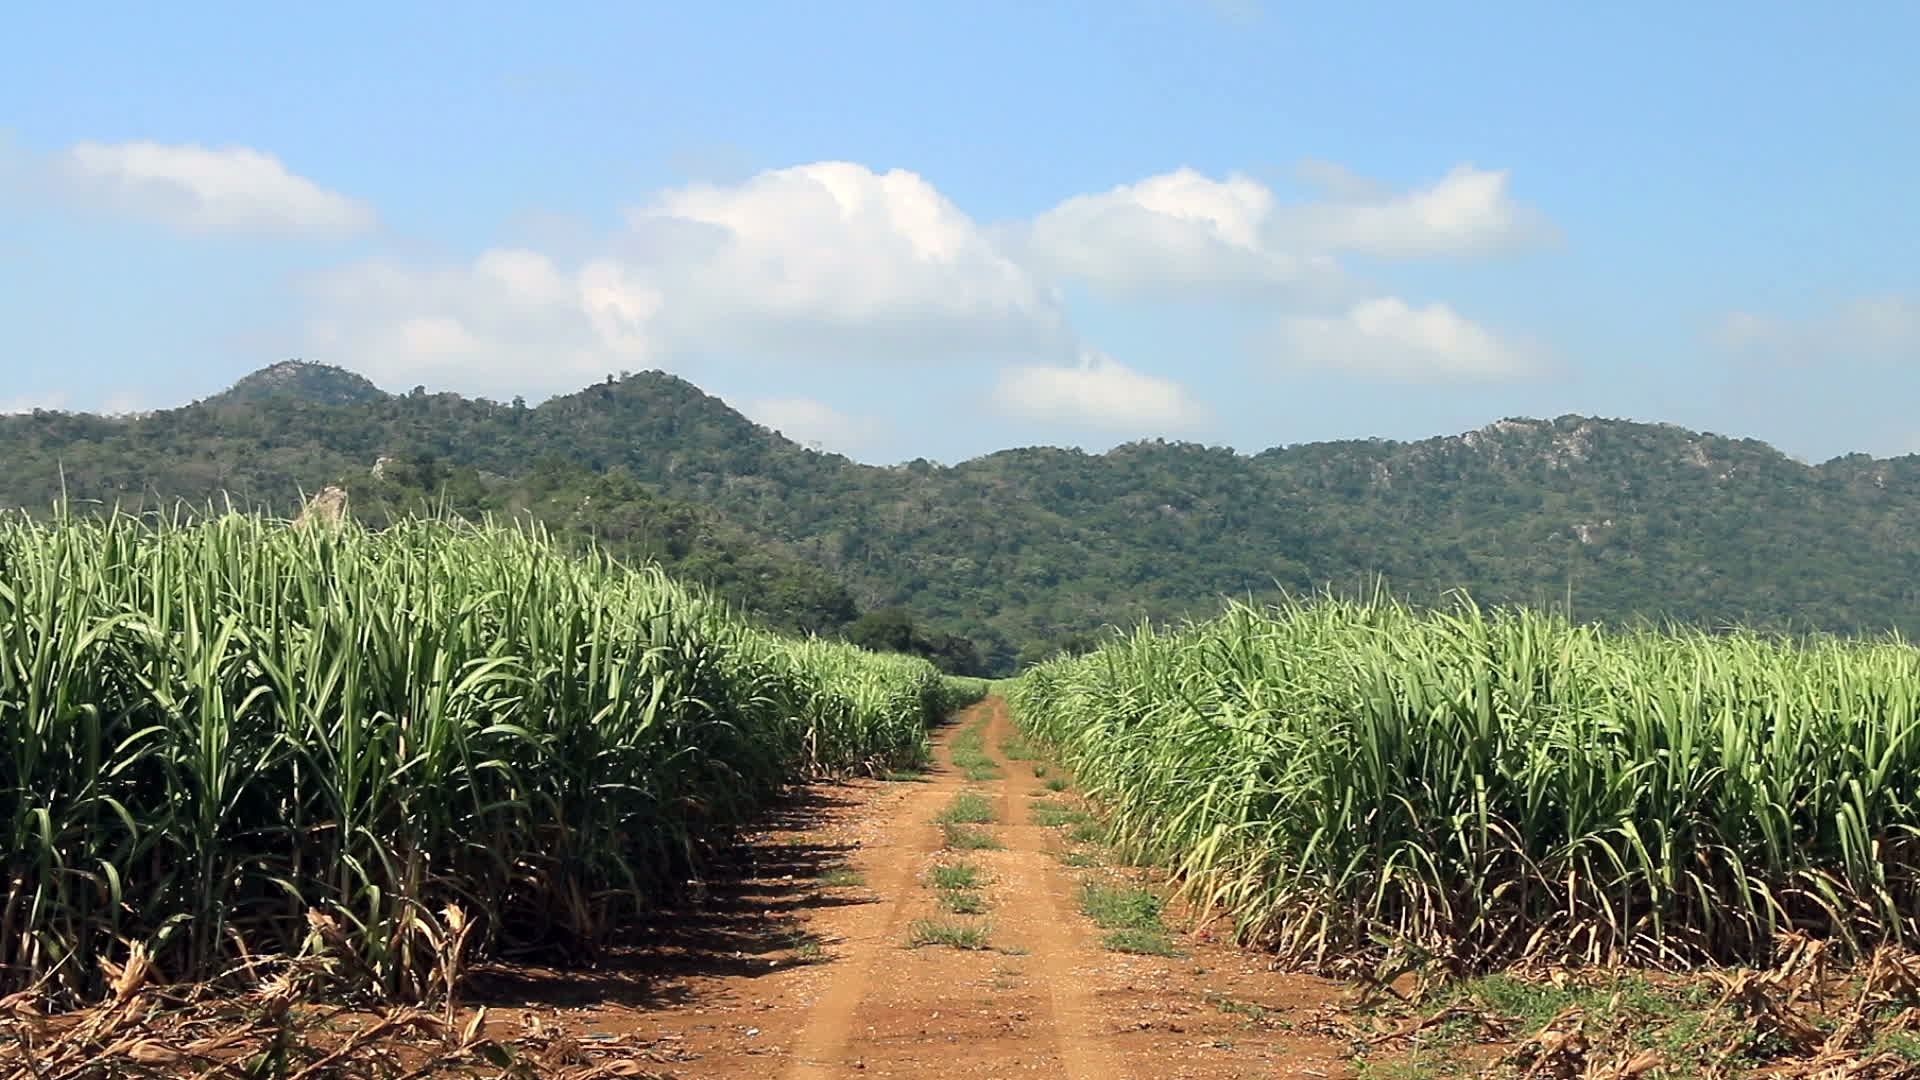 1920x1080 Road in The Middle of A Sugarcane Field 2019134 Stock Vide